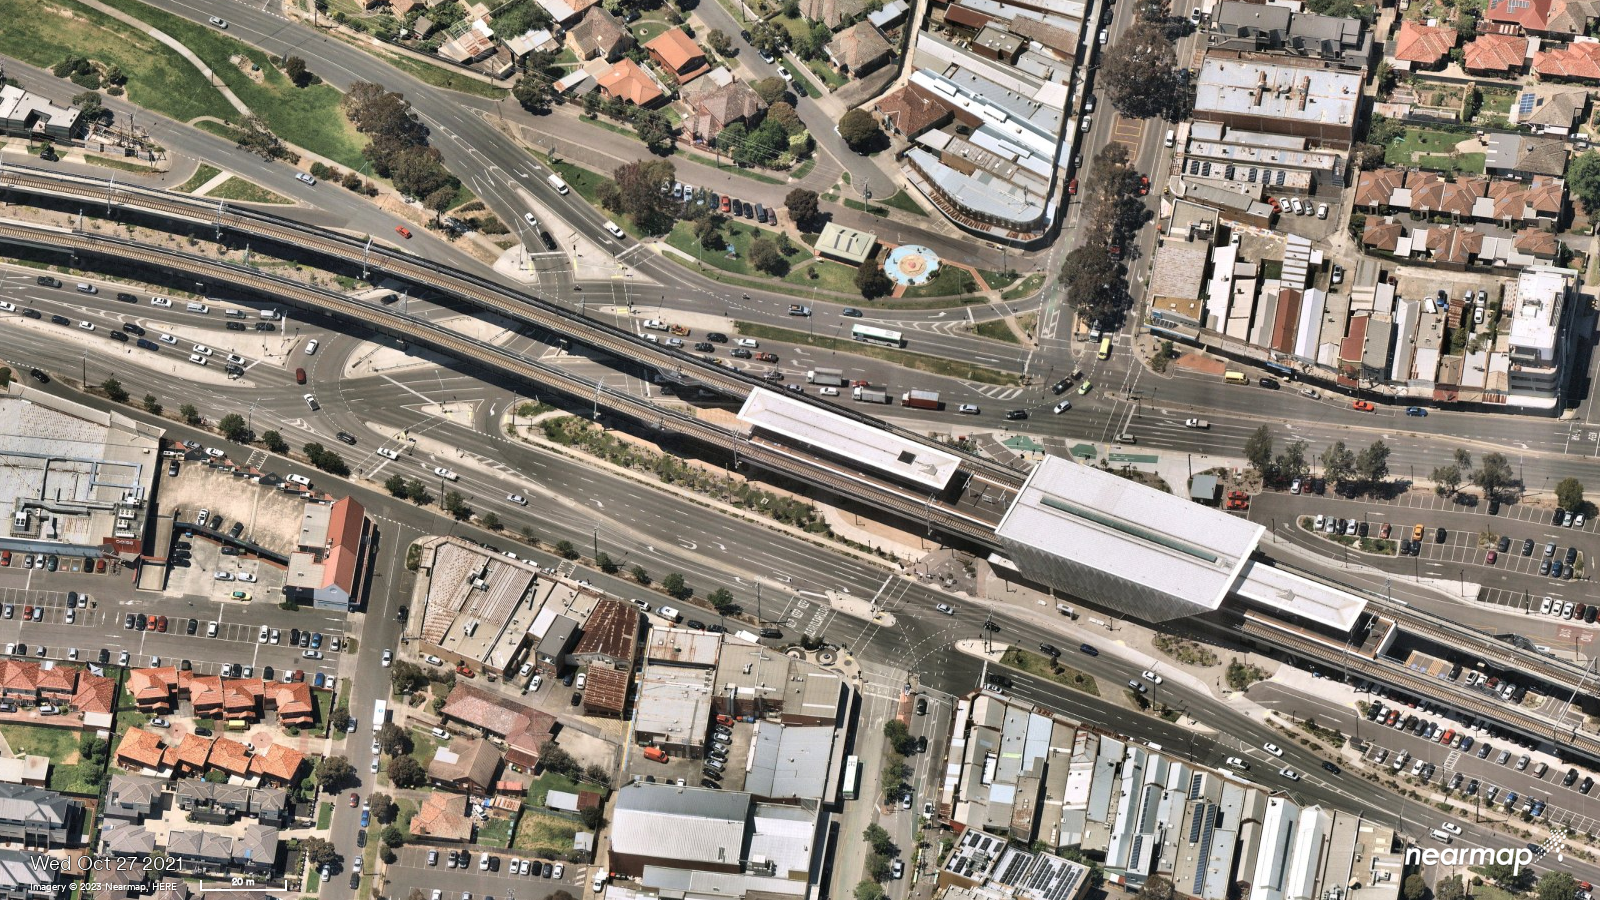 Oblique aerial photo of the current road intersection layout around Reservoir railway station